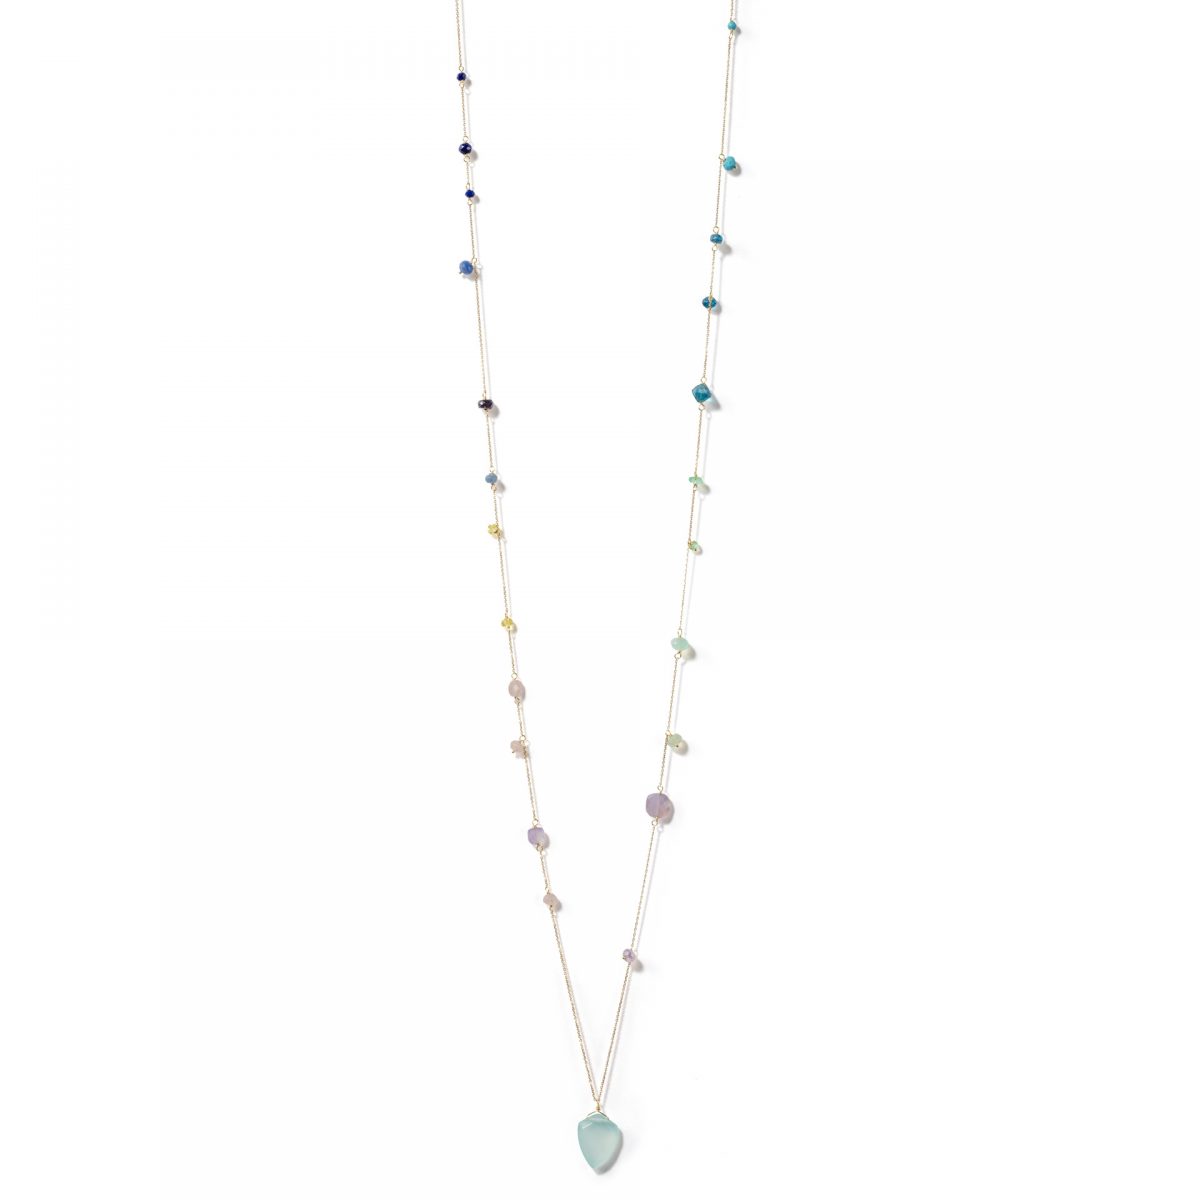 swp_necklace_5_232